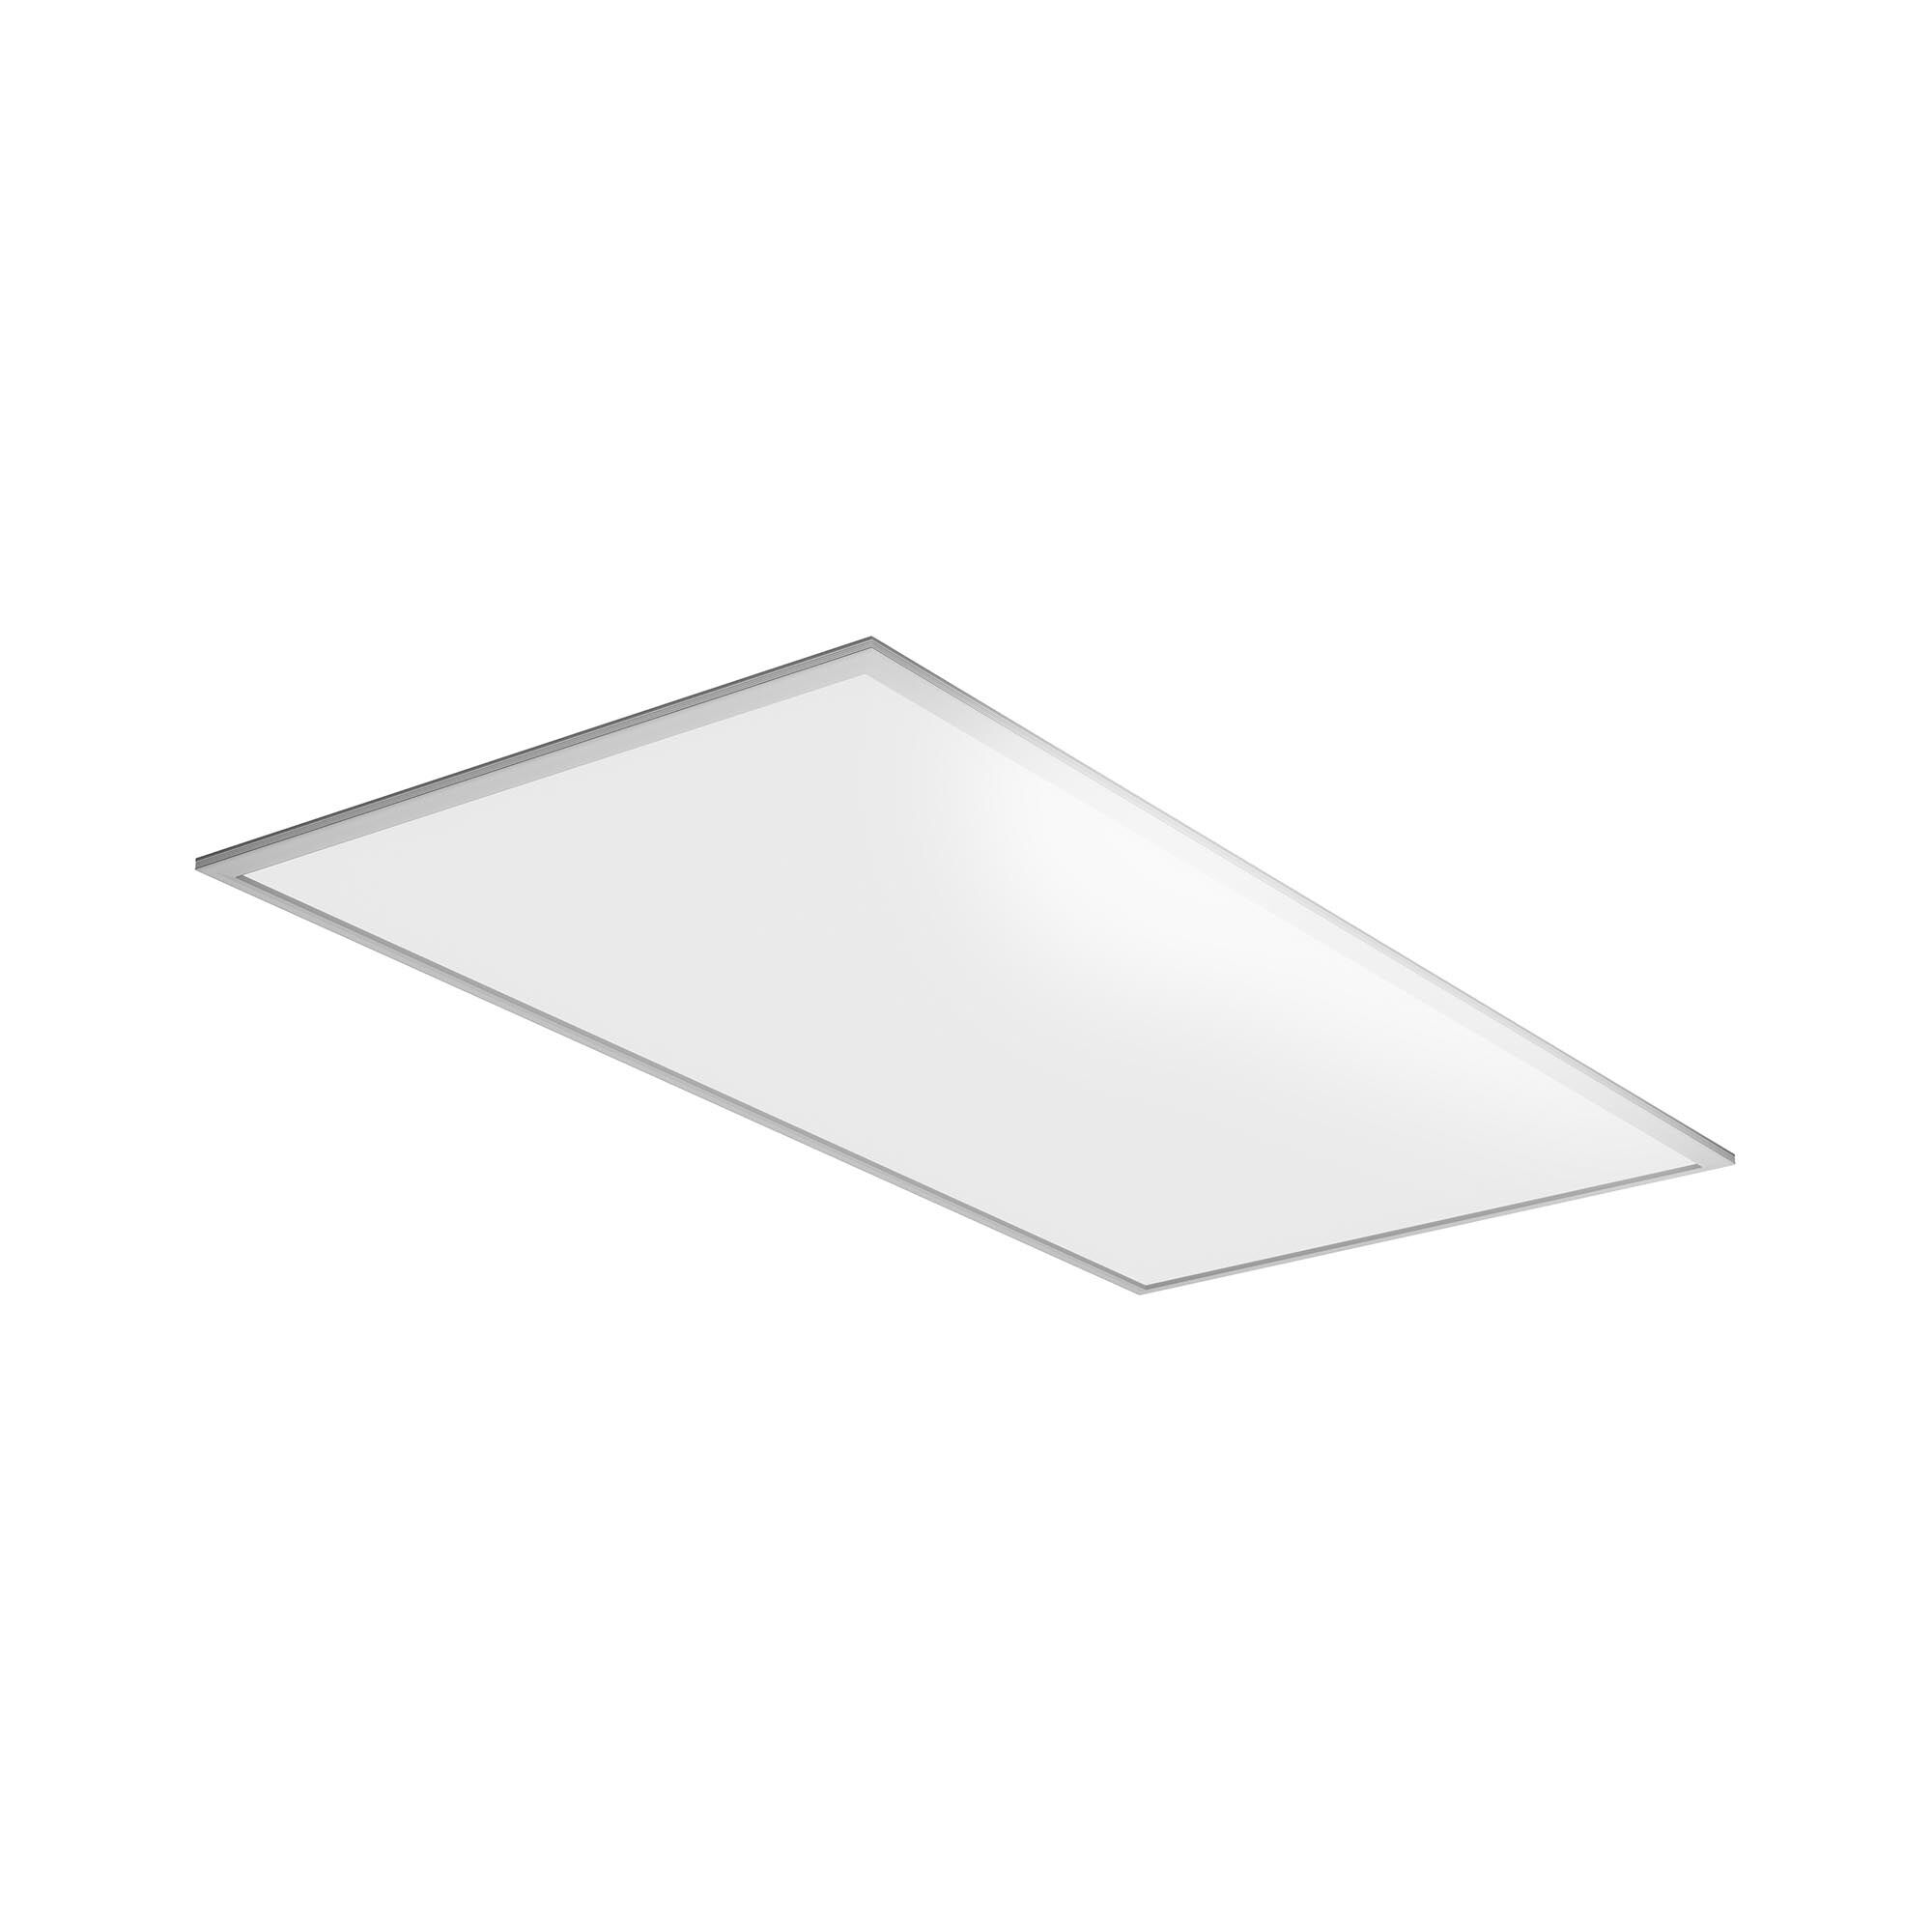 Fromm & Starck LED Ceiling Panel - 120 x 60 cm - 72 W - 7,200 lm - 5,700 K